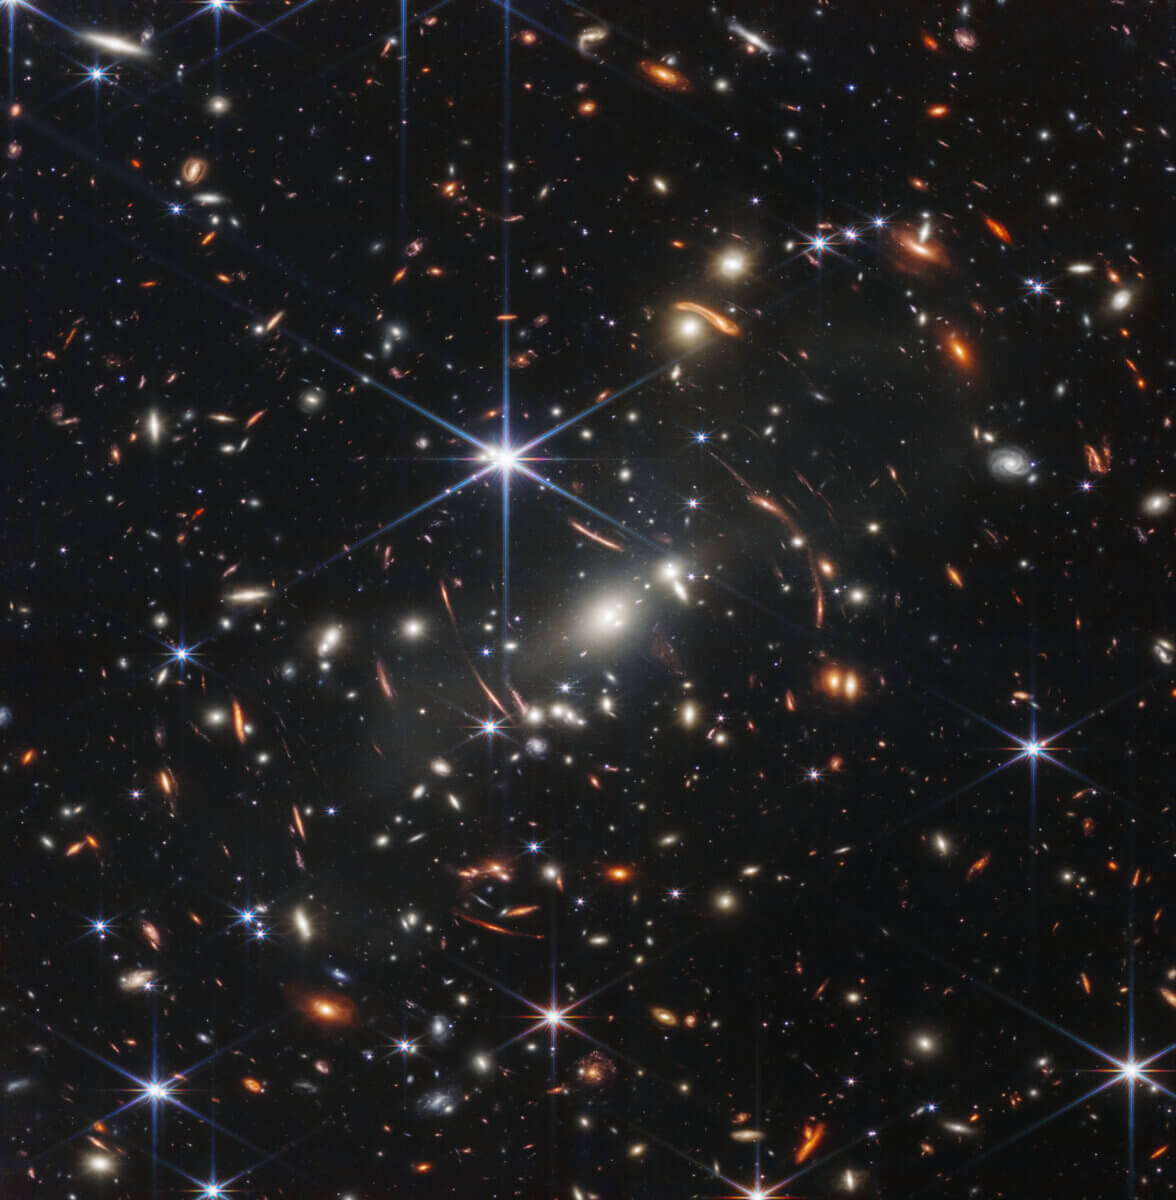 Image of the universe from the James Webb Space Telescope